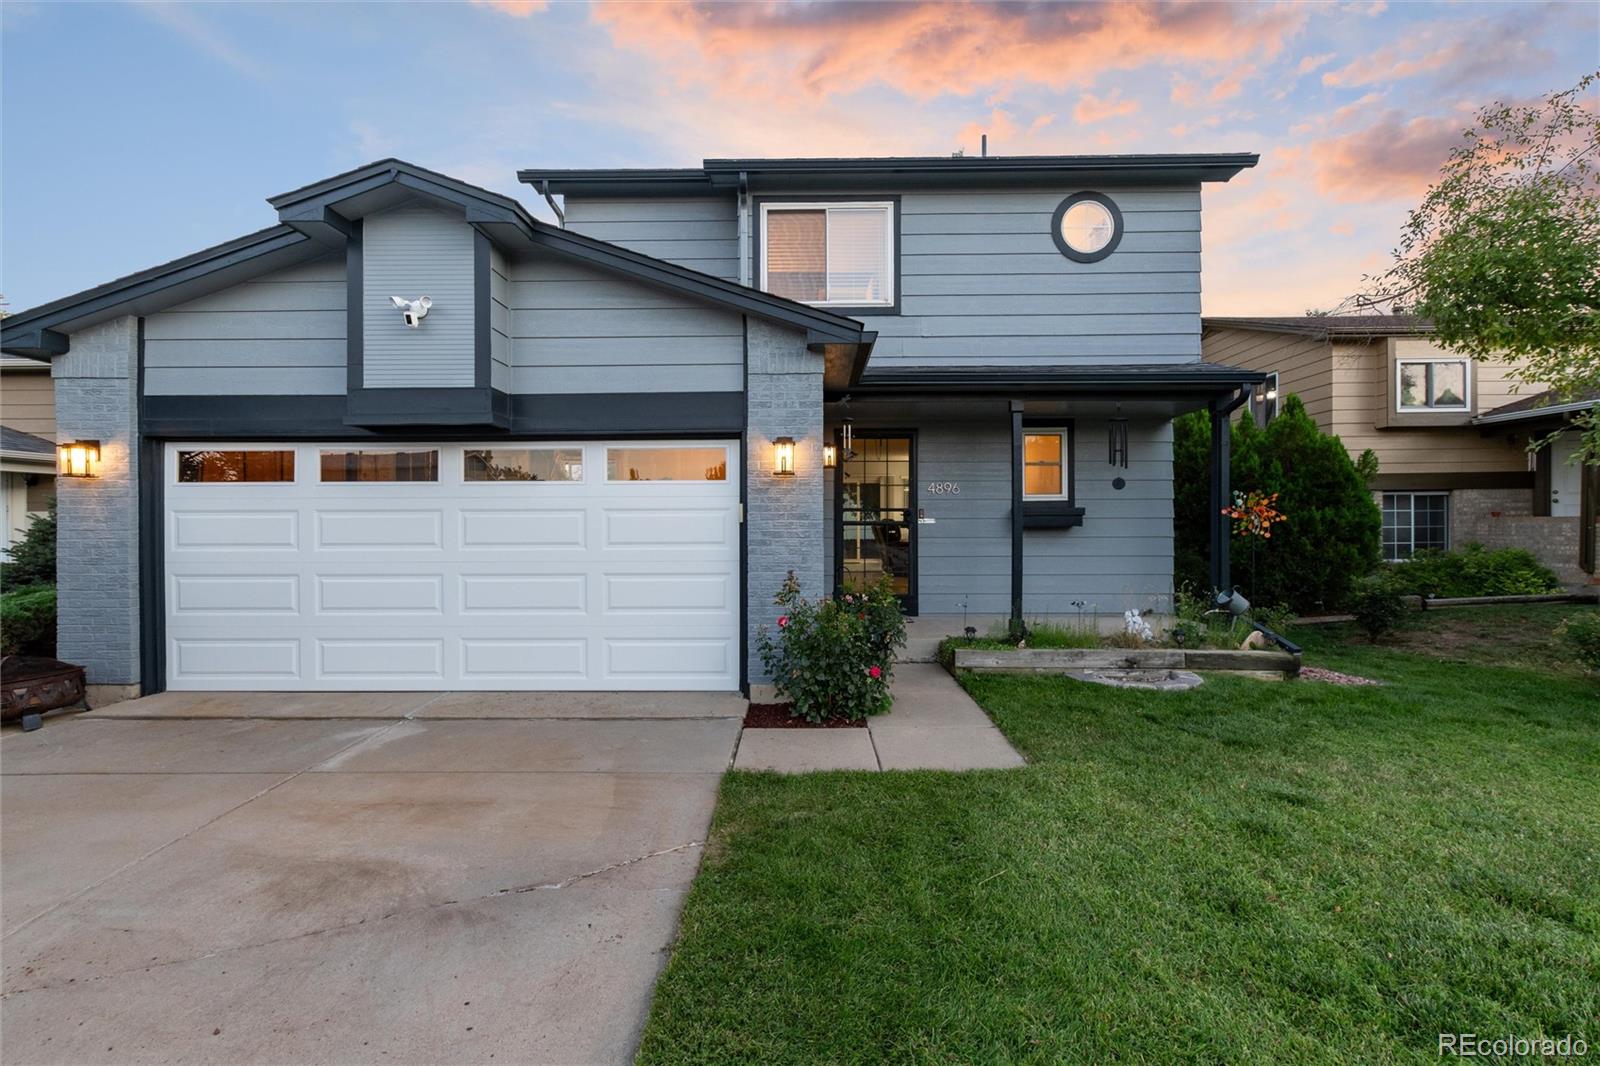 4896 w 61st place, Arvada sold home. Closed on 2023-09-13 for $605,000.